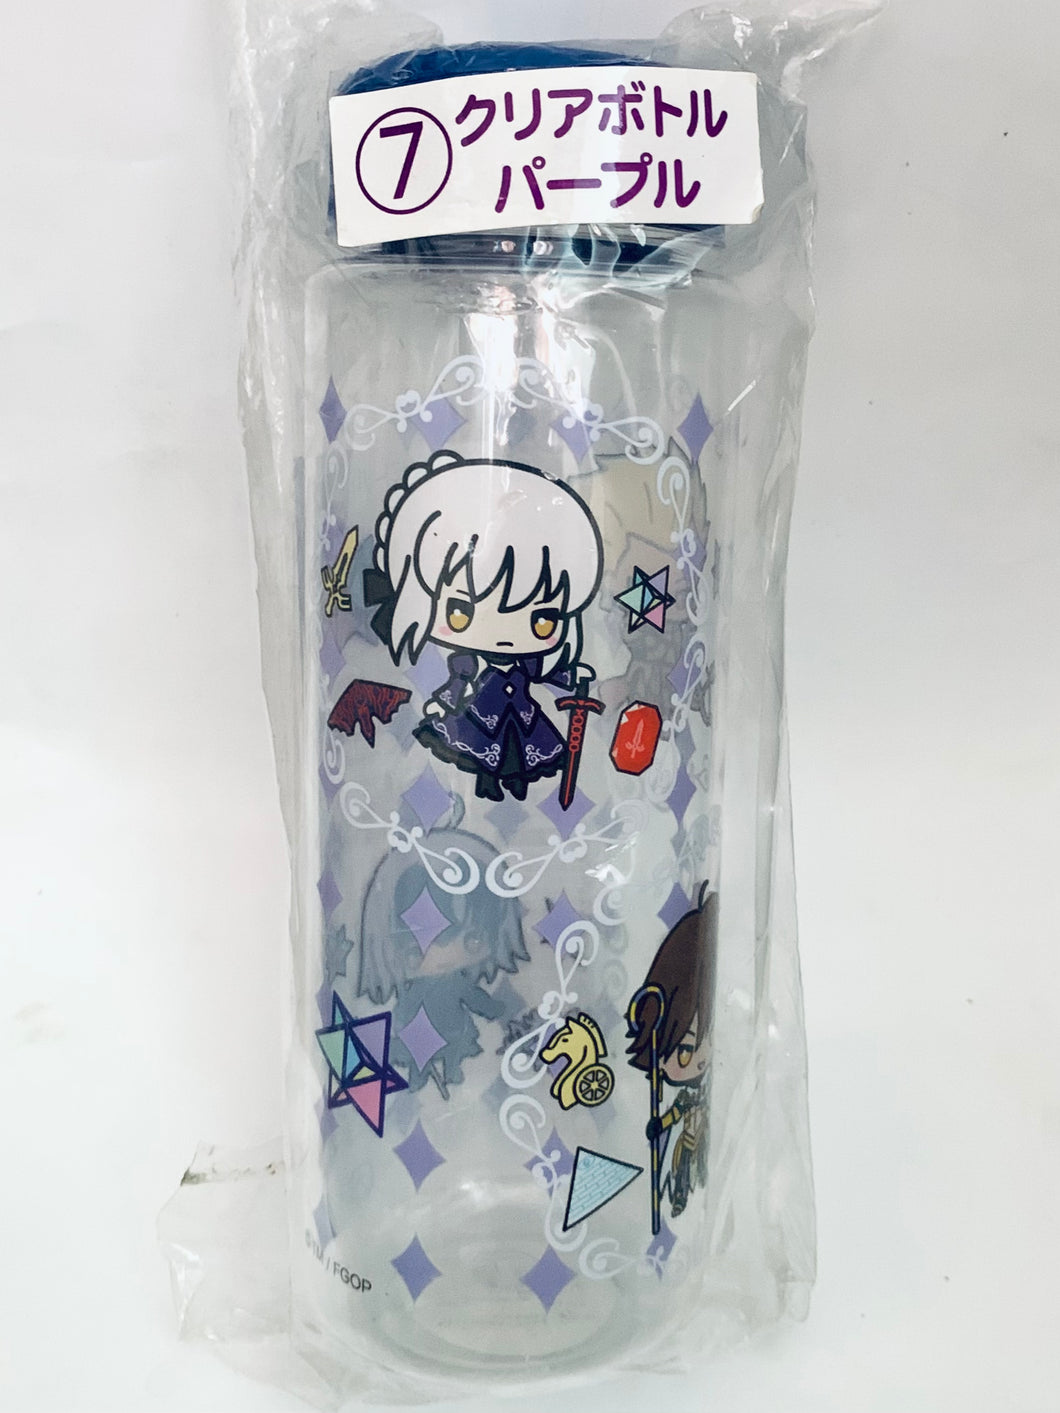 Fate/Grand Order - Clear Bottle for Cold Water - Sanrio Kuji